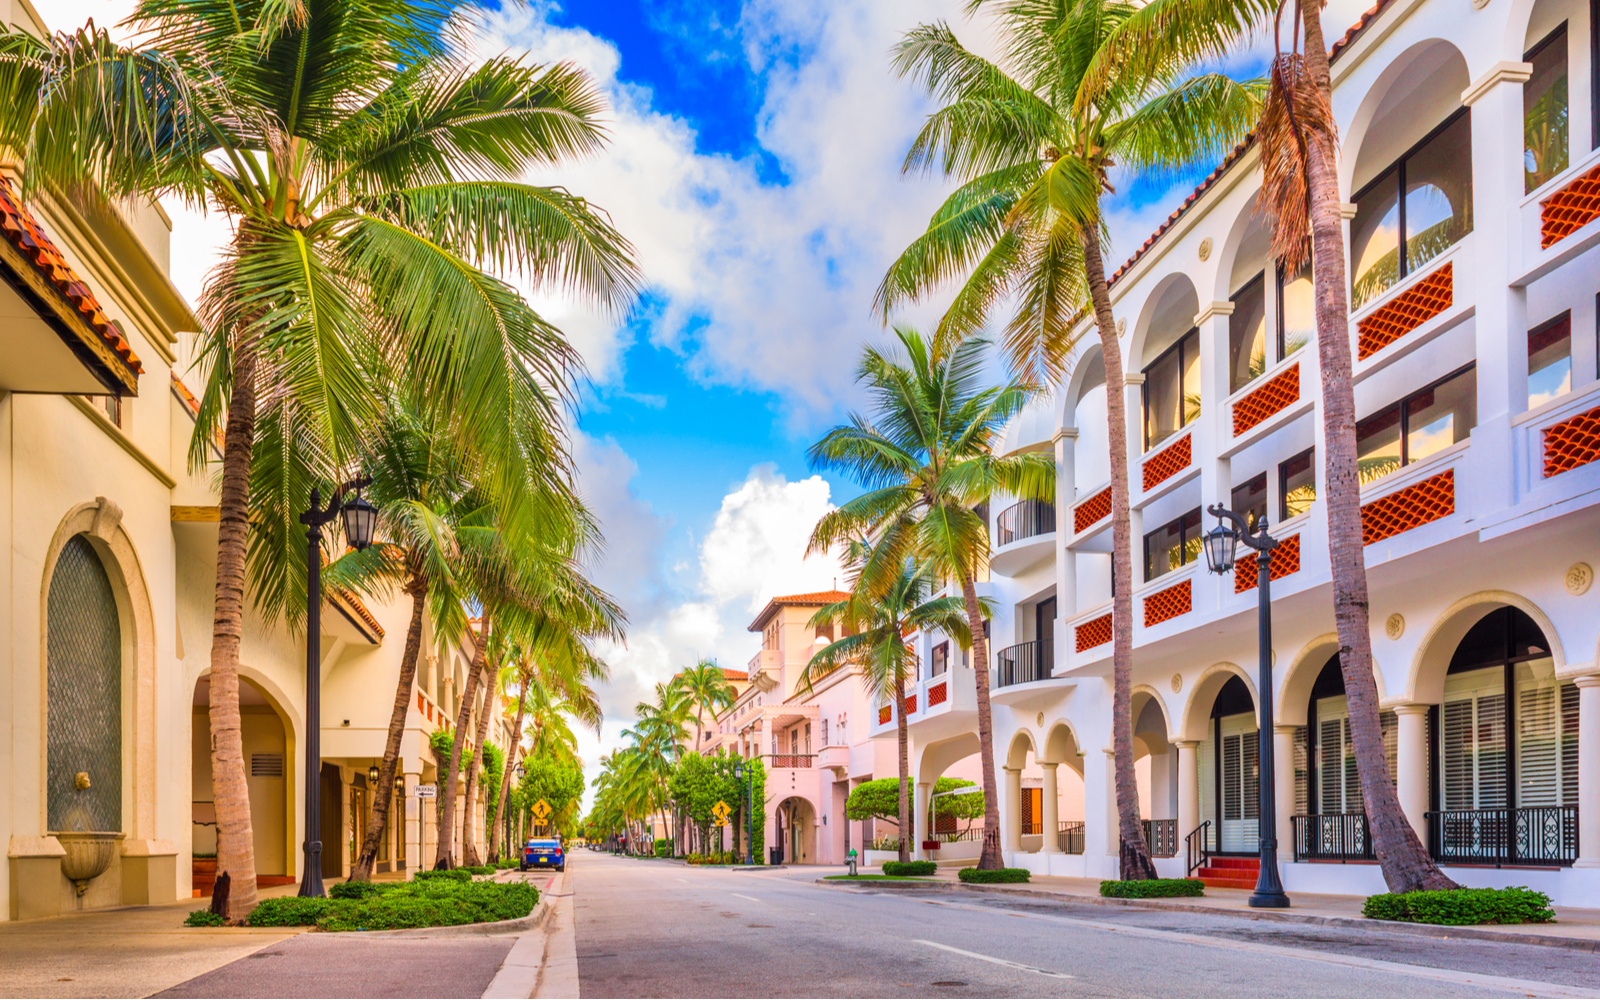 Is Palm Beach Safe to Visit in 2022? | Safety Concerns